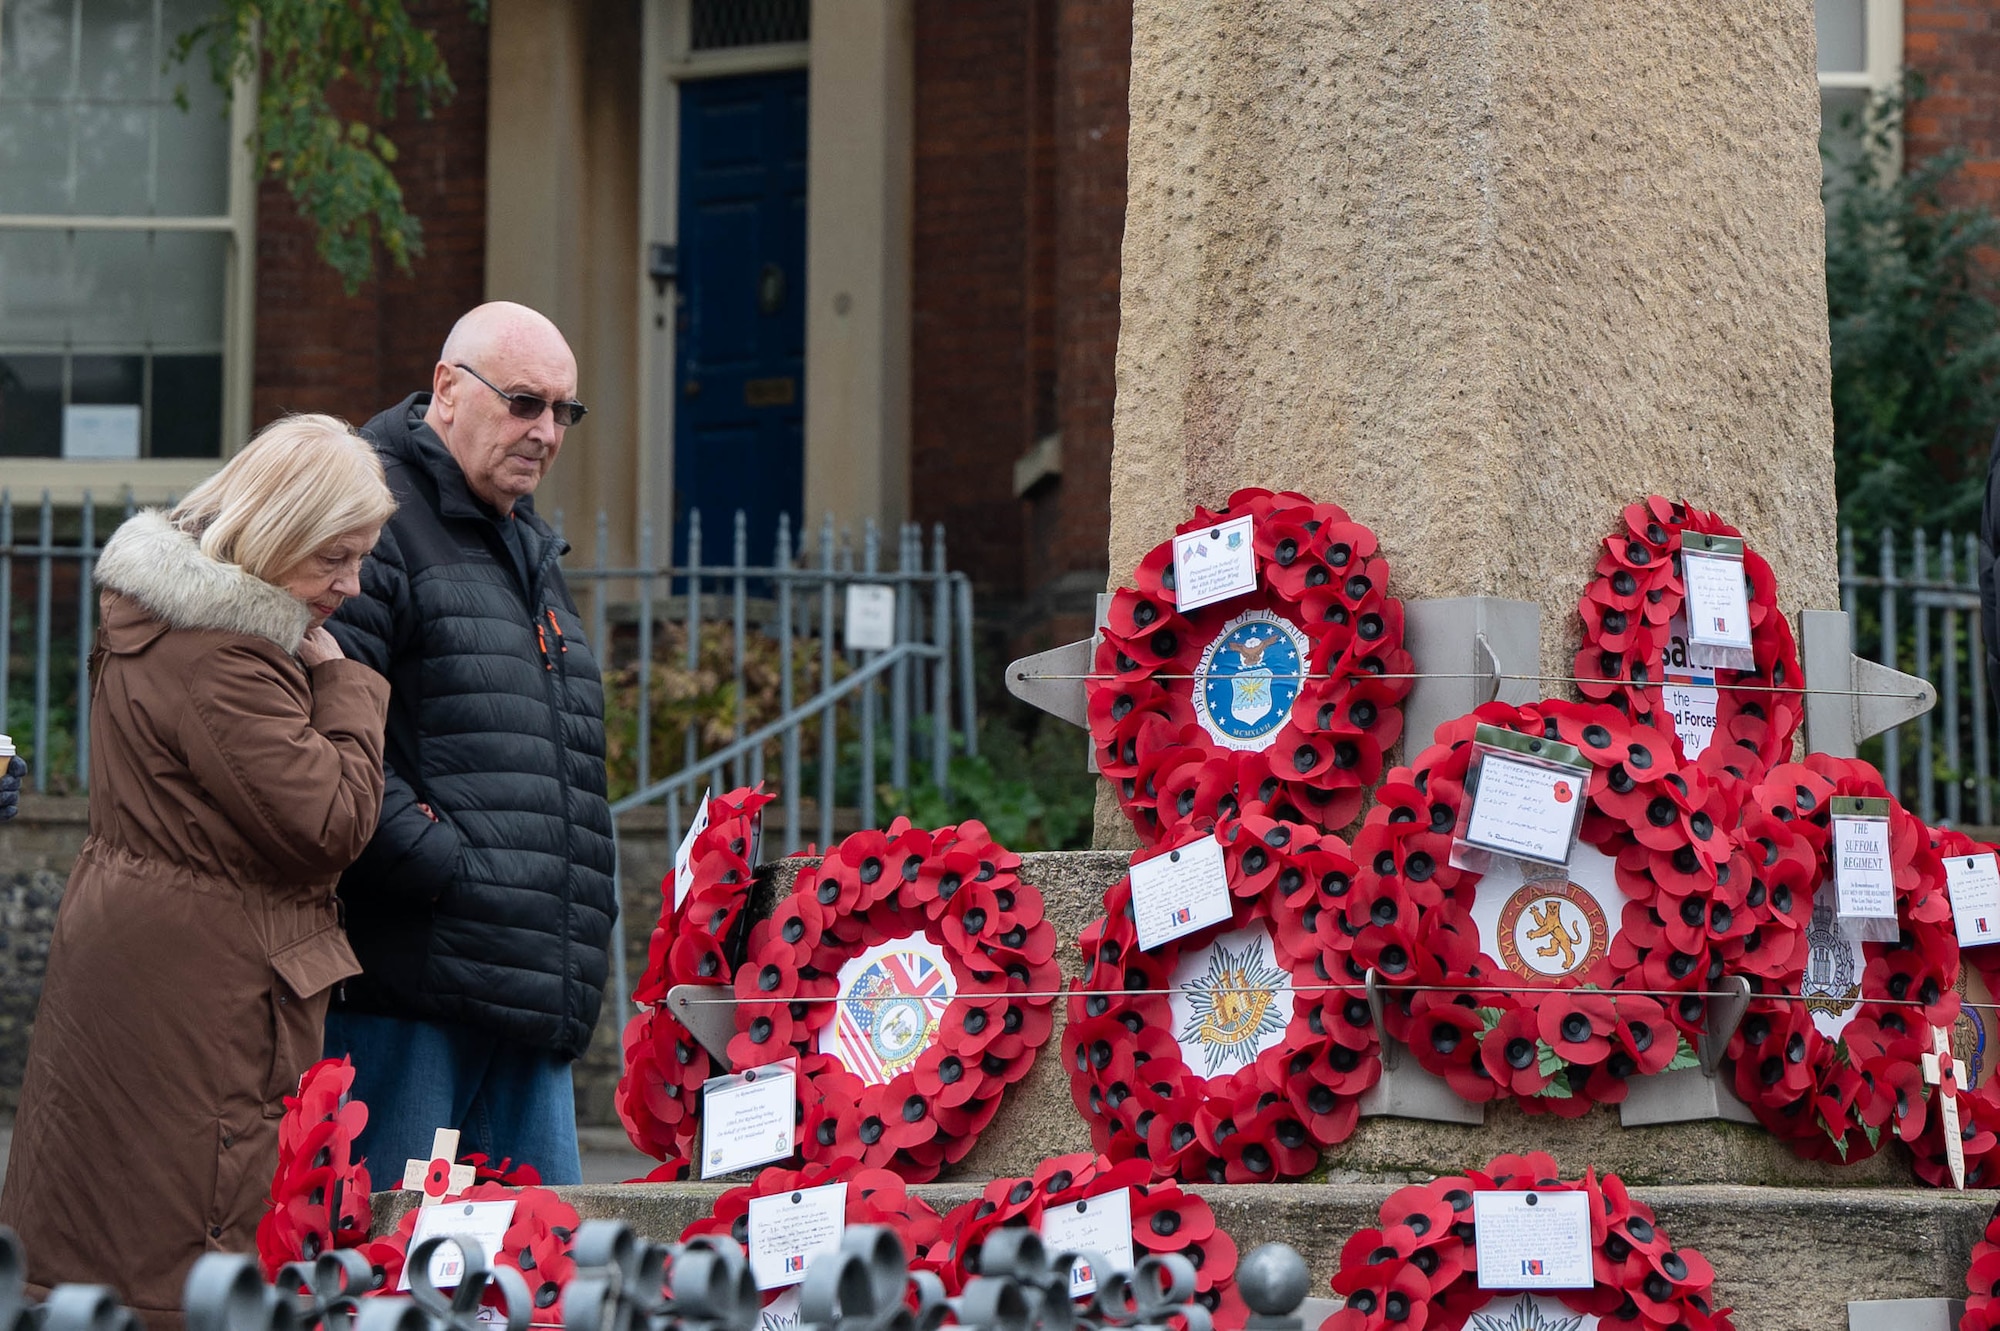 2 people look at poppy wreaths set up for Remembrance Day